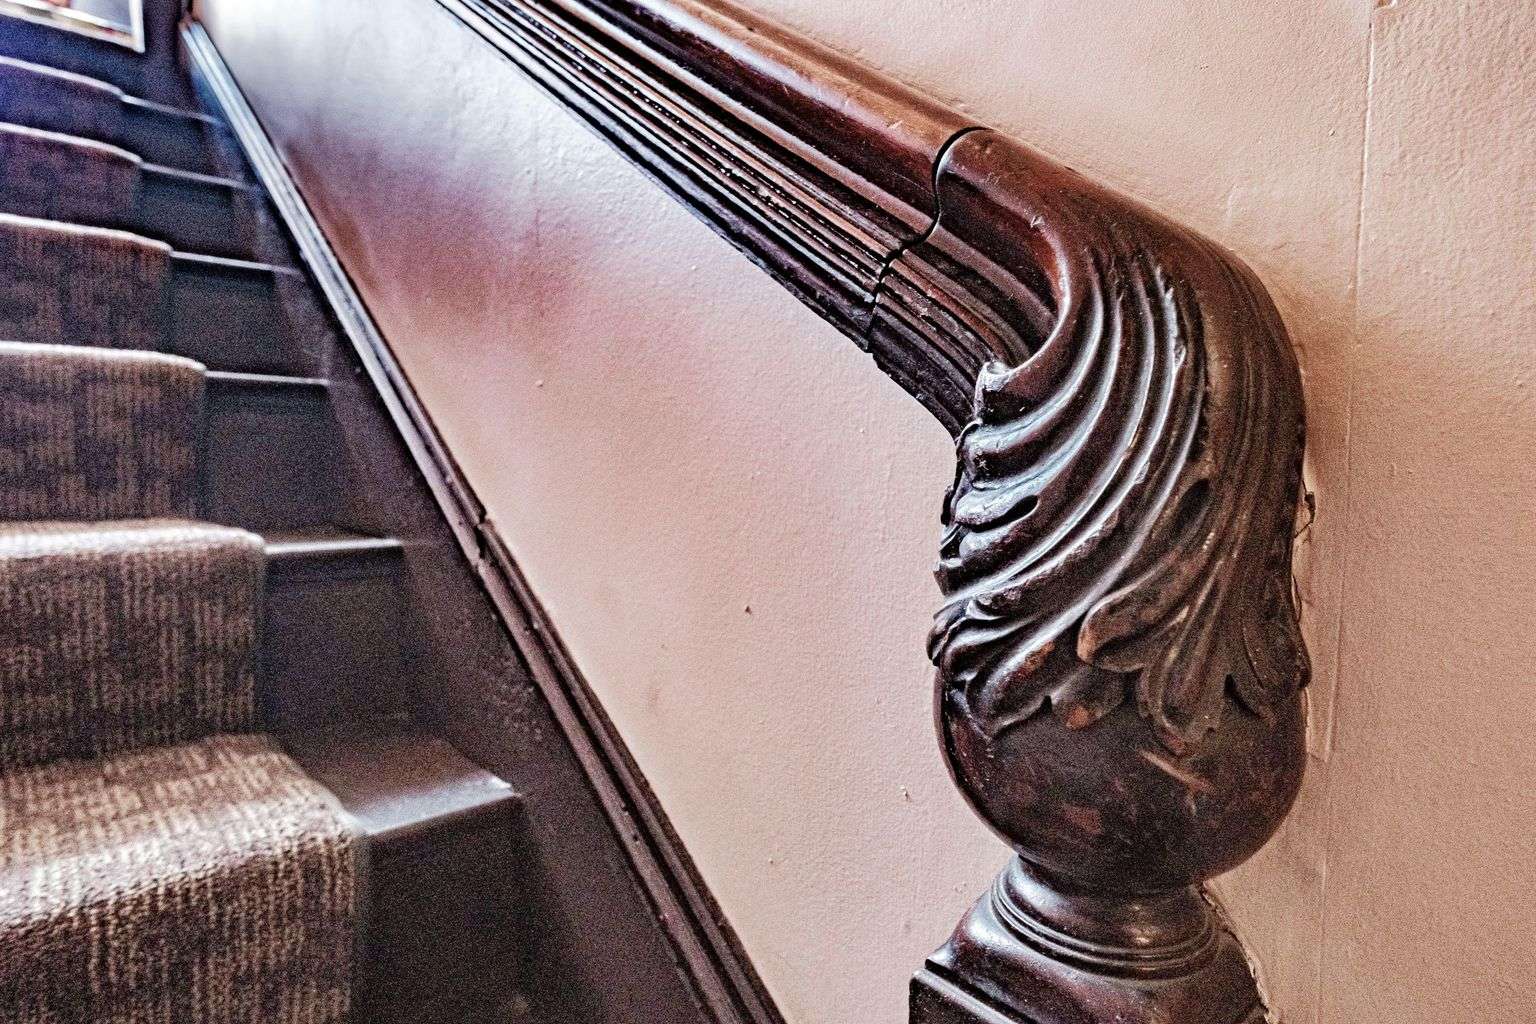 old wood bannister and carpeted stairs